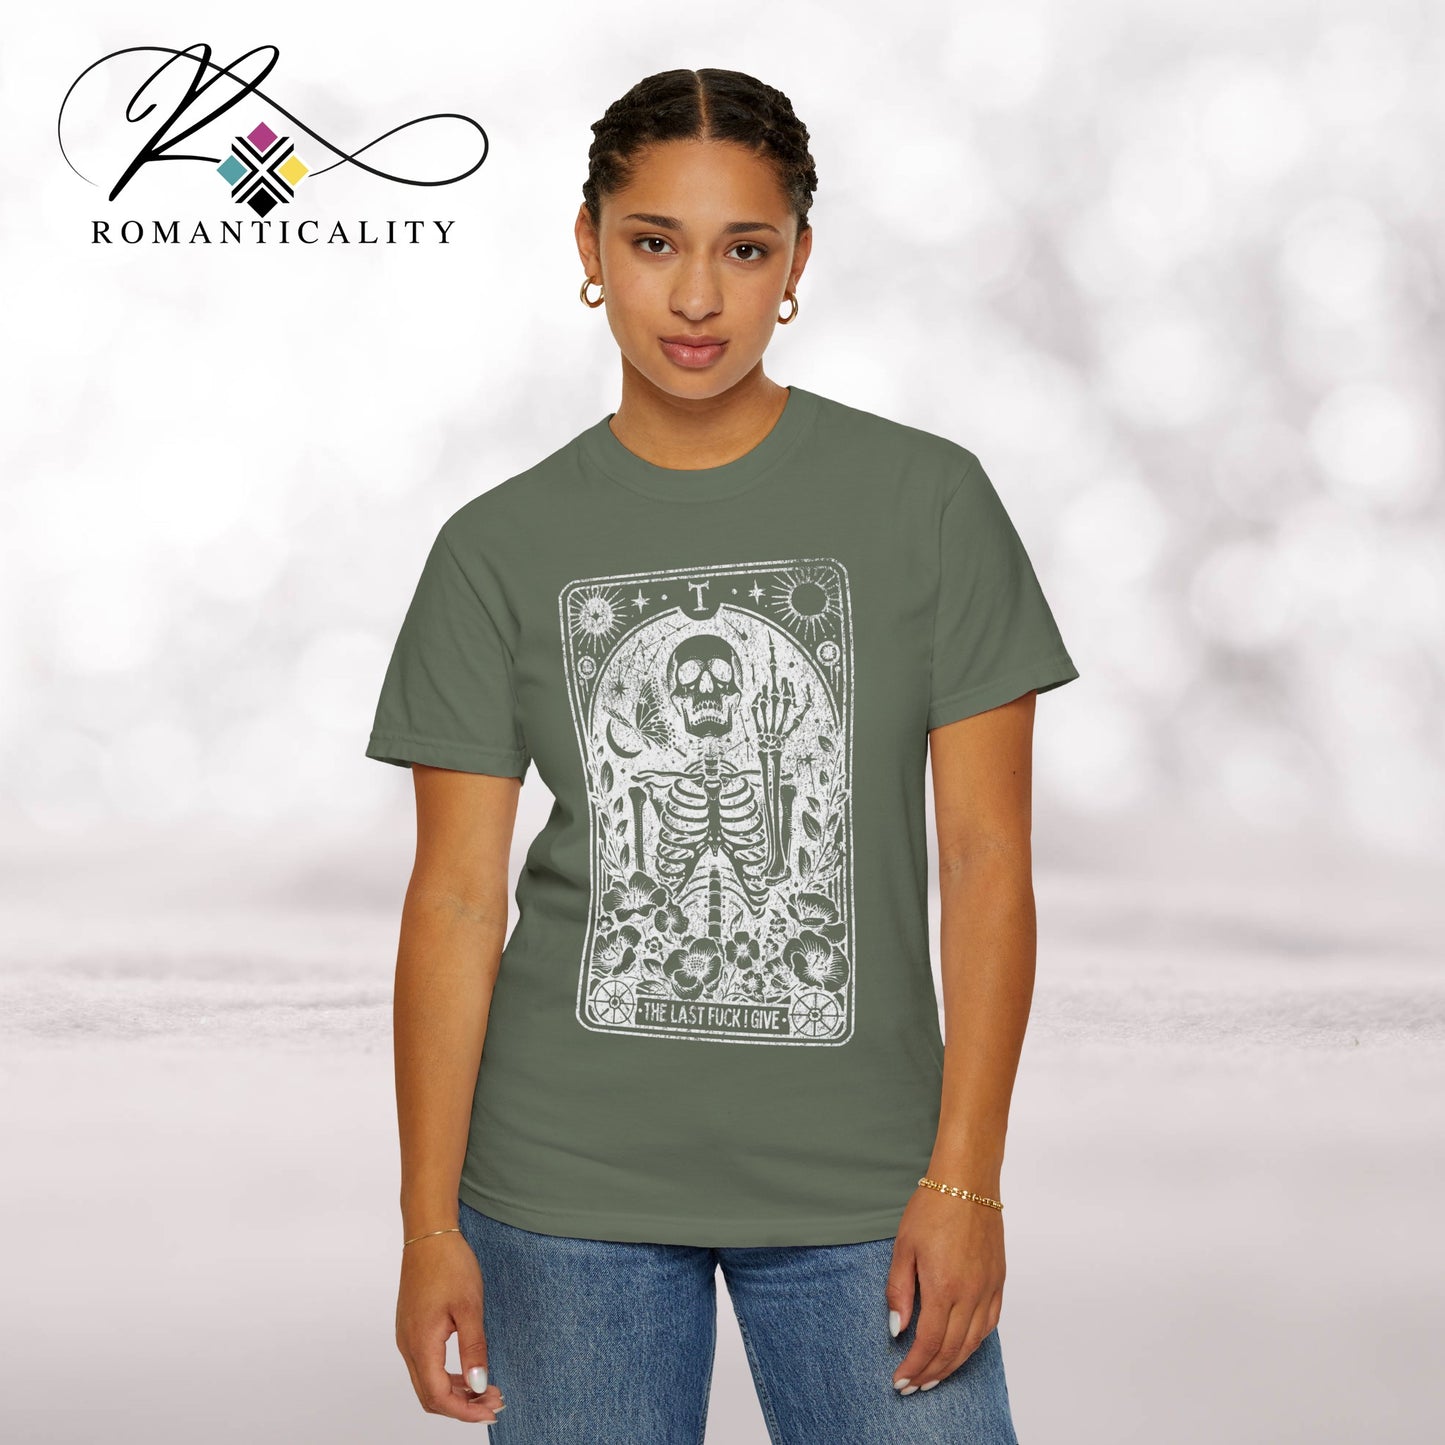 The Last F I Give Tarot Graphic T-Shirt-Humorous Tee-Comfort Colors Graphic Tee-Unisex Graphic Tee-Tarot Card Graphic T-shirt-Giftful-Gift-Mother's Day